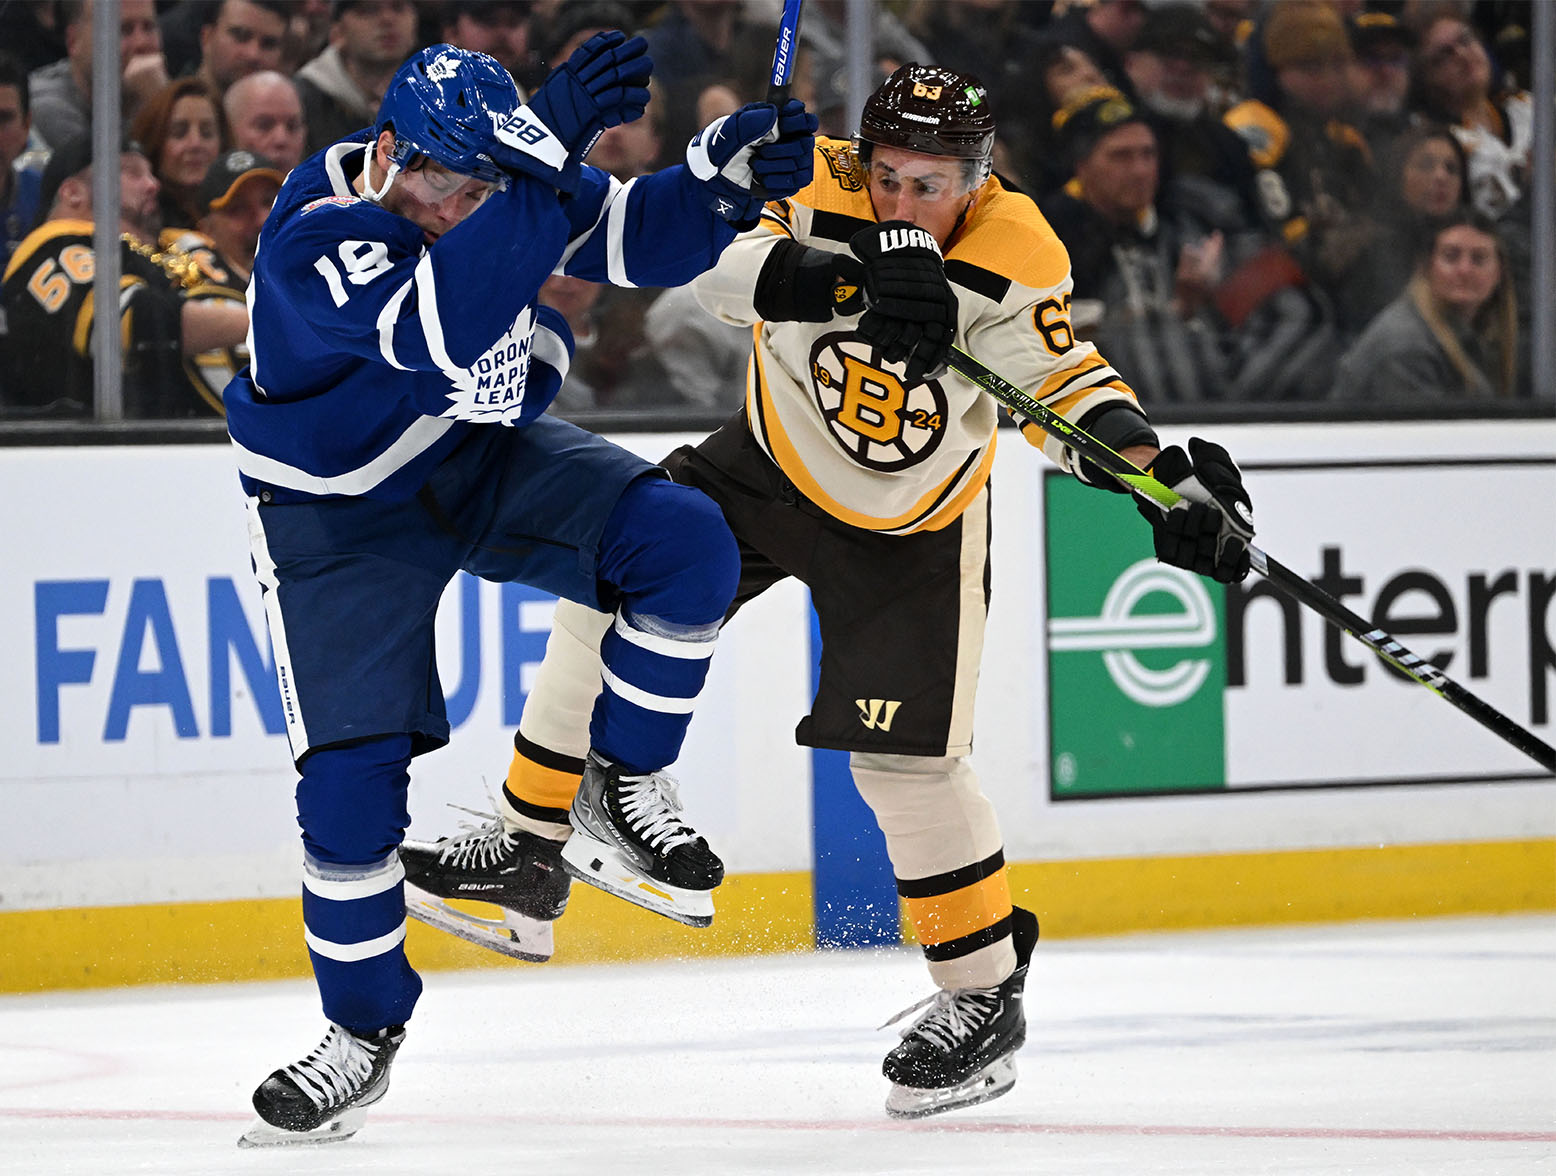 Nov 2, 2023; Boston, Massachusetts, USA; Toronto Maple Leafs center Noah Gregor (18) checks Boston Bruins left wing Brad Marchand (63) during the first period at the TD Garden. Mandatory Credit: Brian Fluharty-USA TODAY Sports